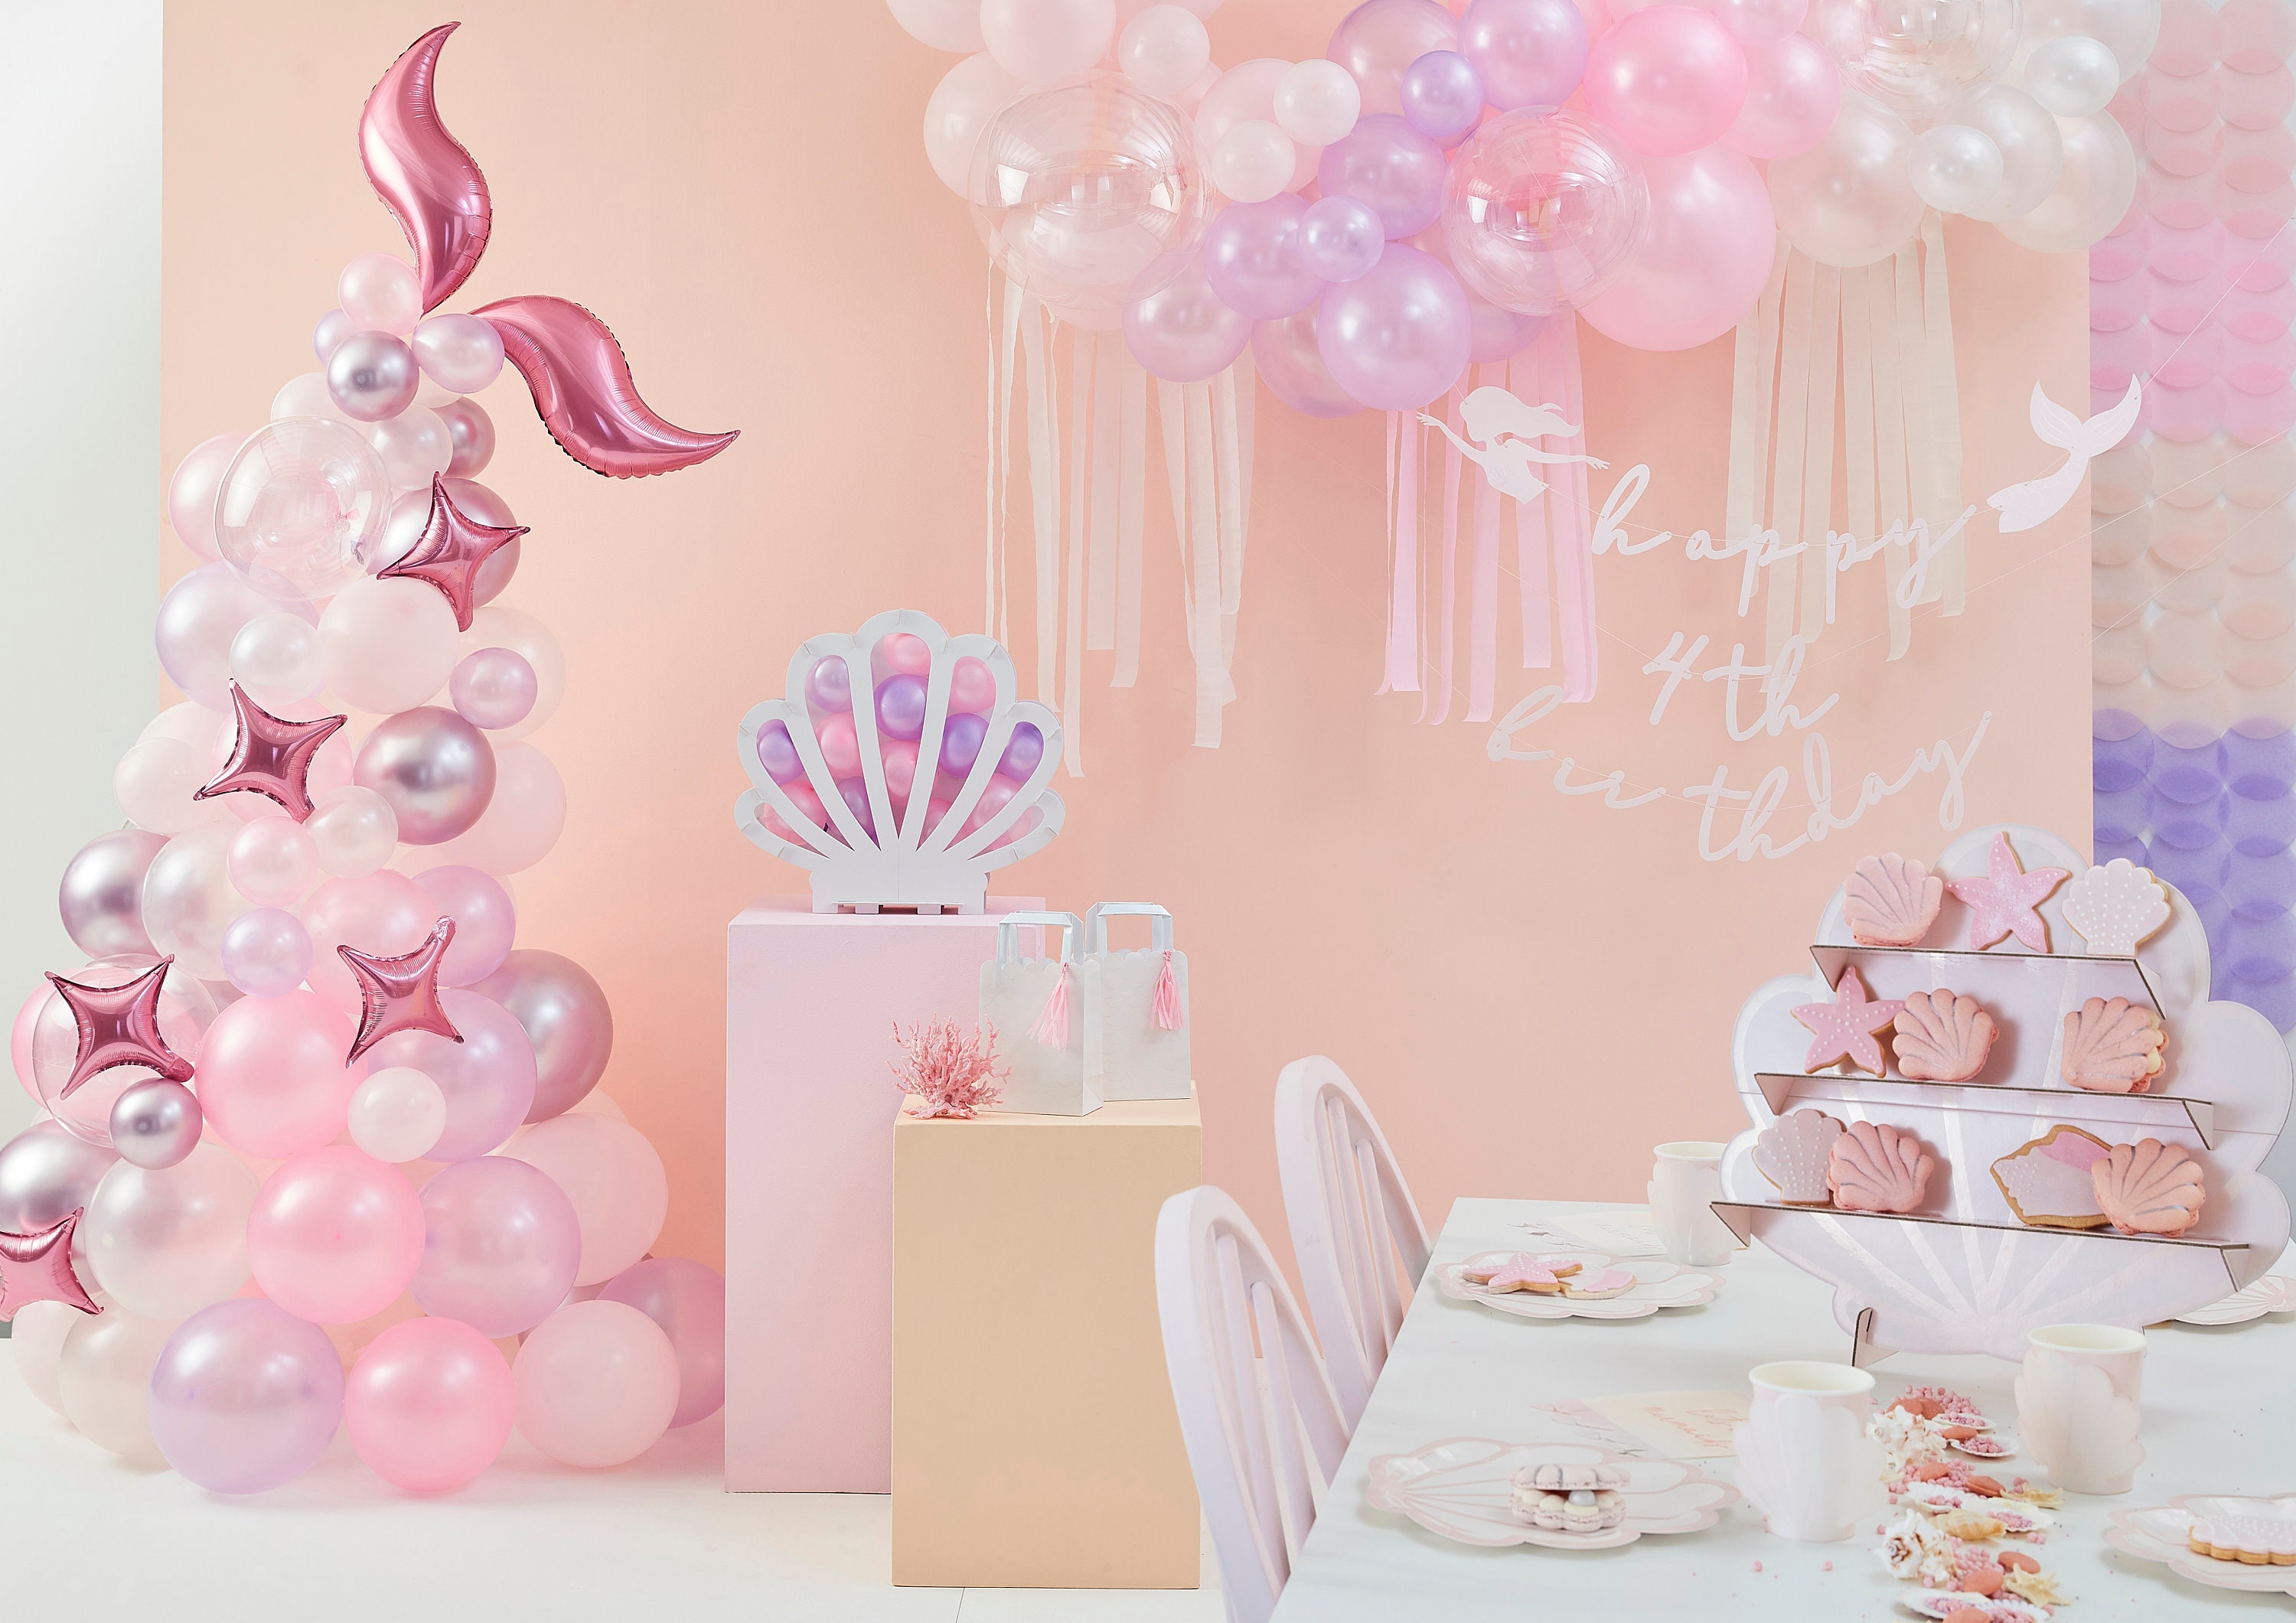 7 Best Ideas for a Pearl-Themed Party - Everything Enchanting